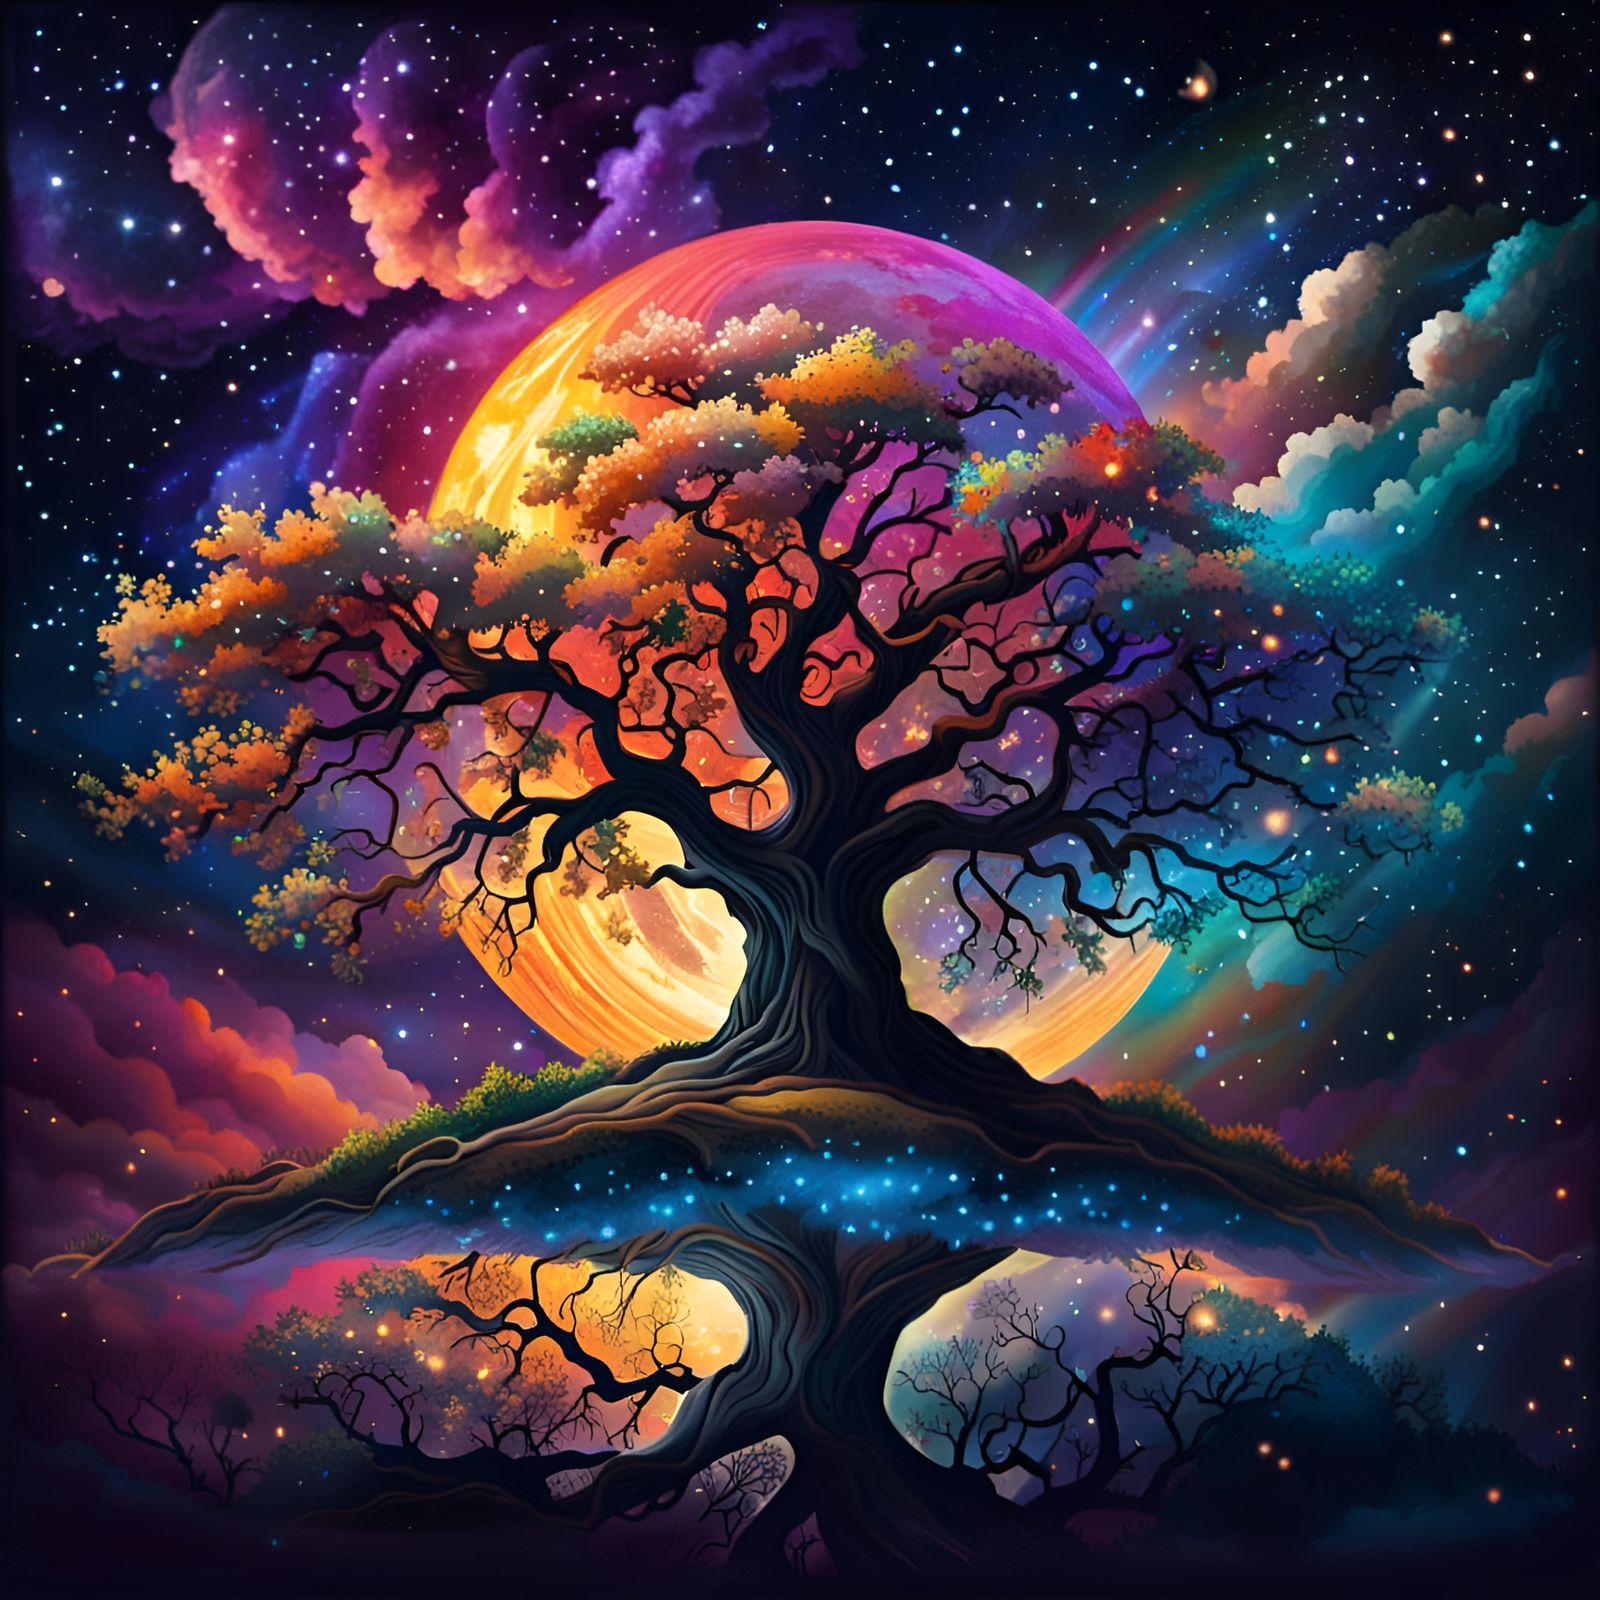 A magical tall oak tree with leaves made of rainbow clouds on a